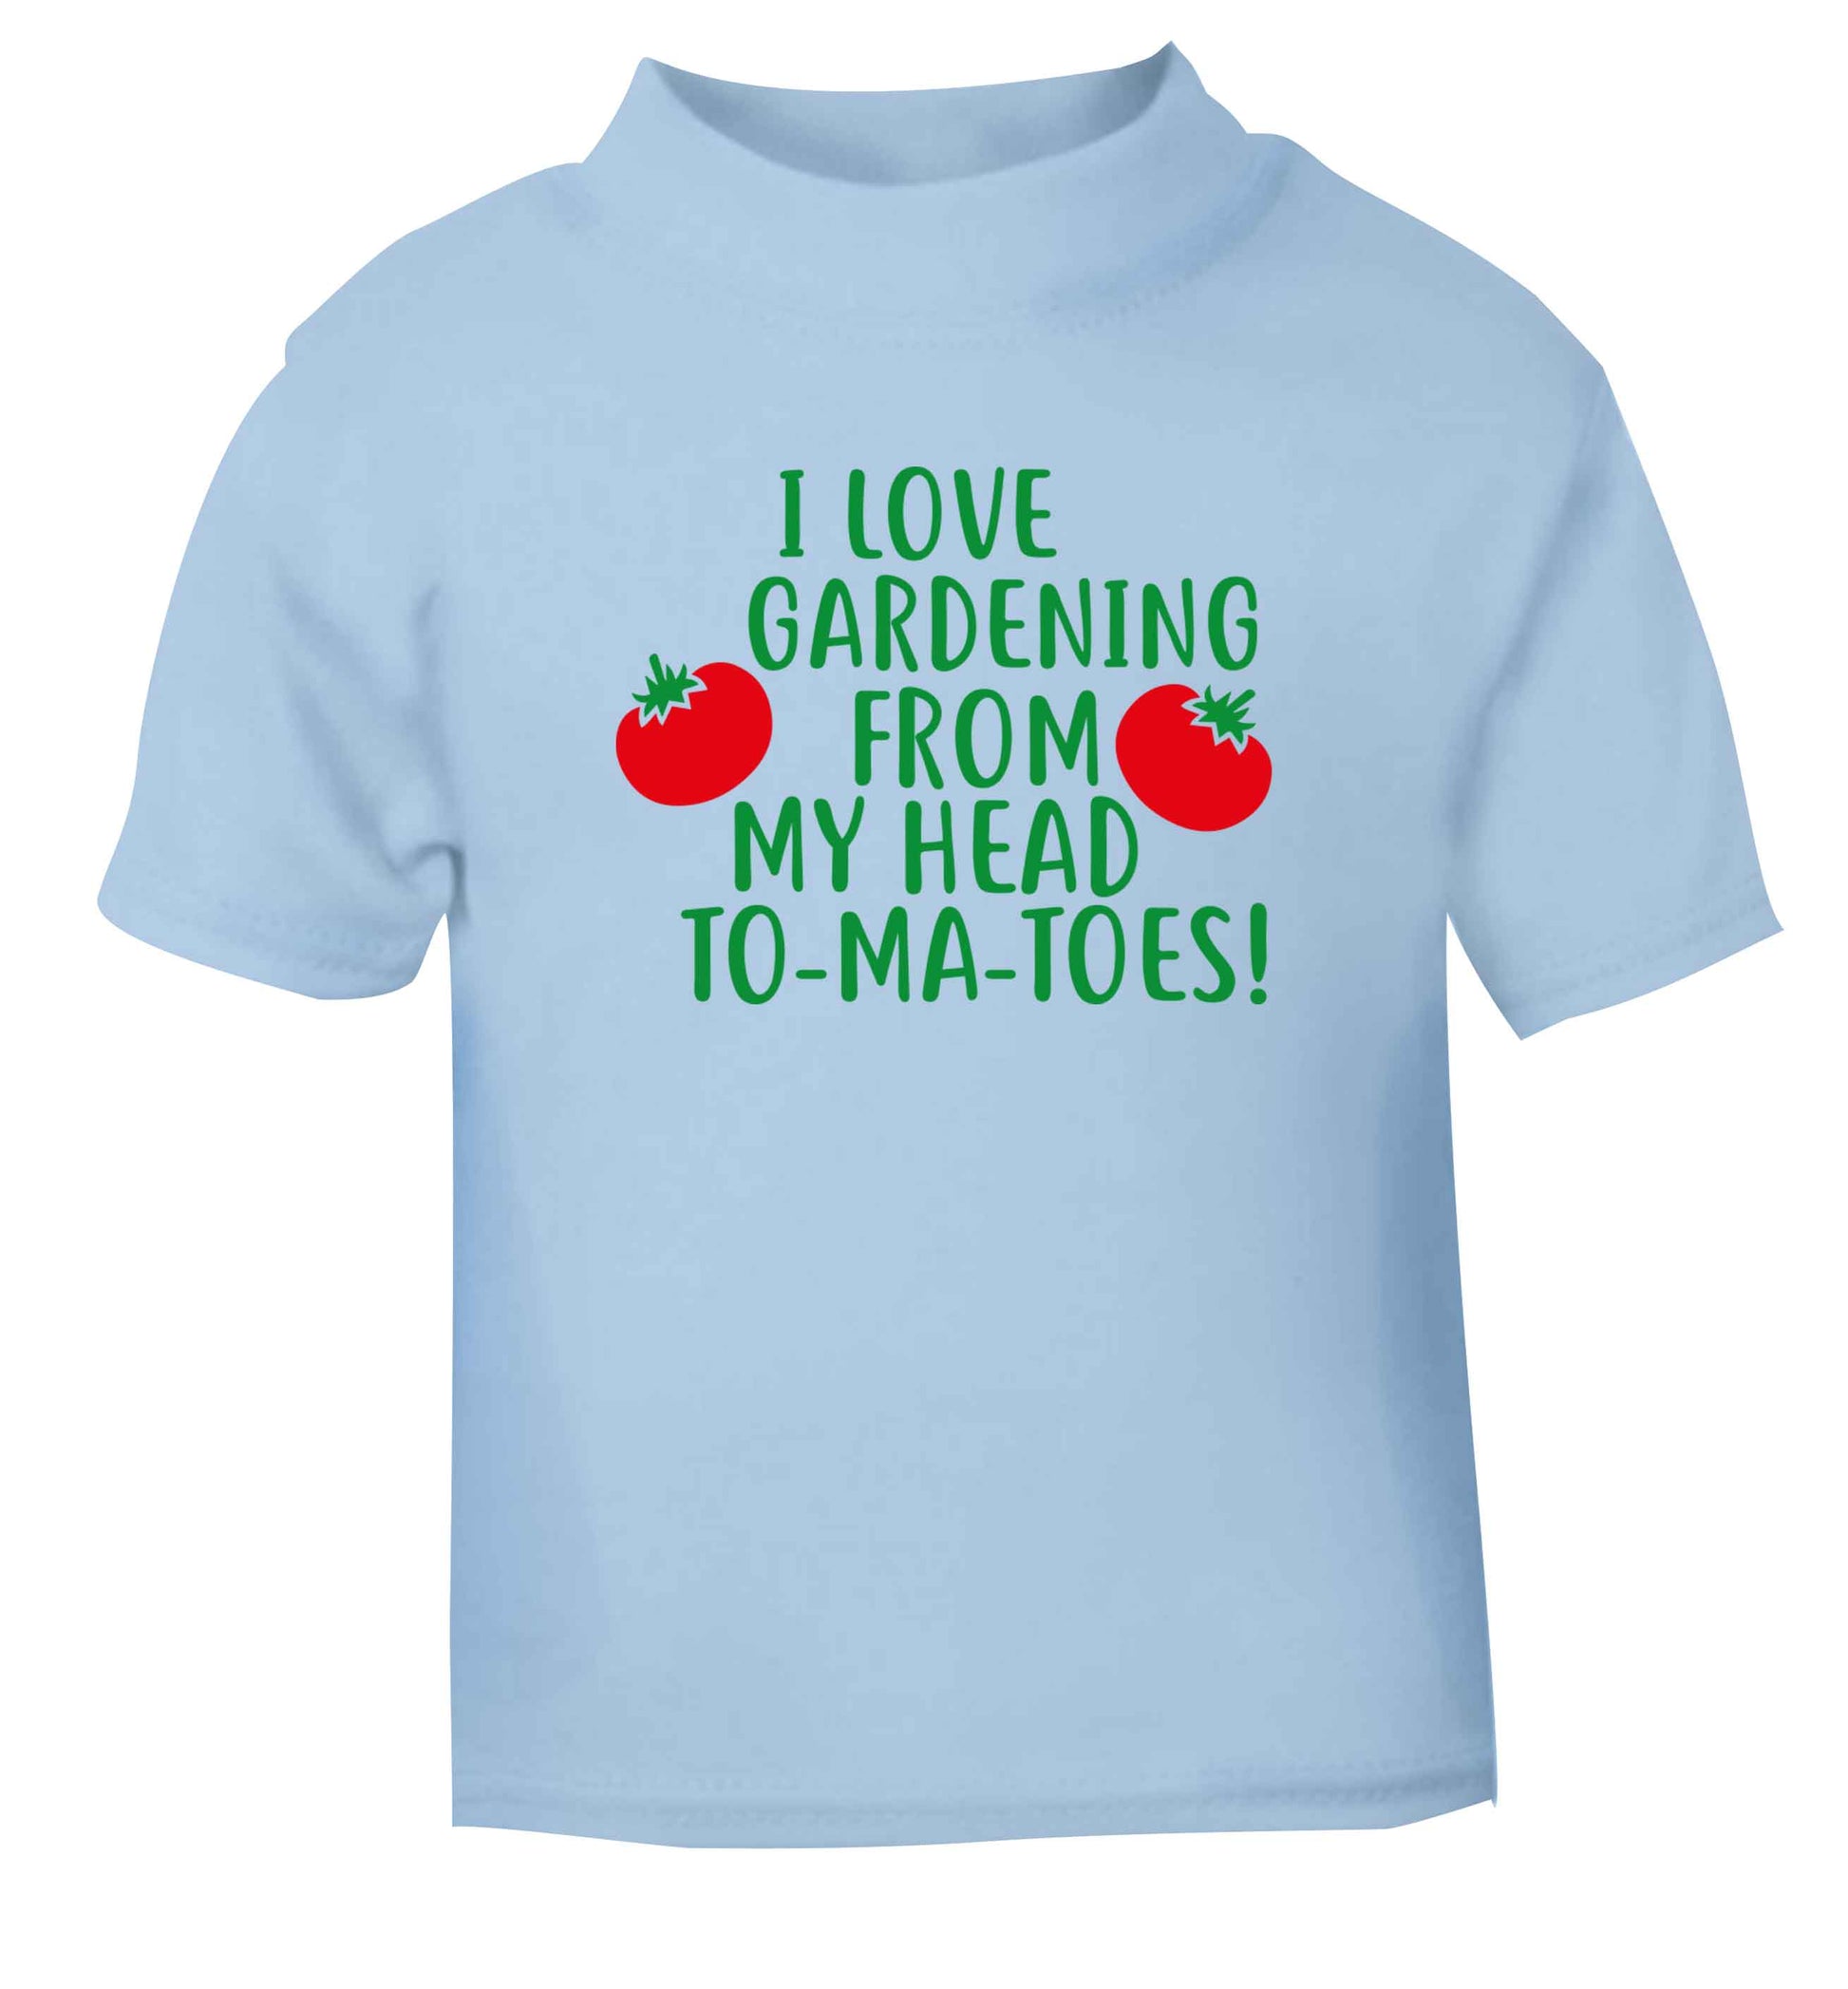 I love gardening from my head to-ma-toes light blue Baby Toddler Tshirt 2 Years